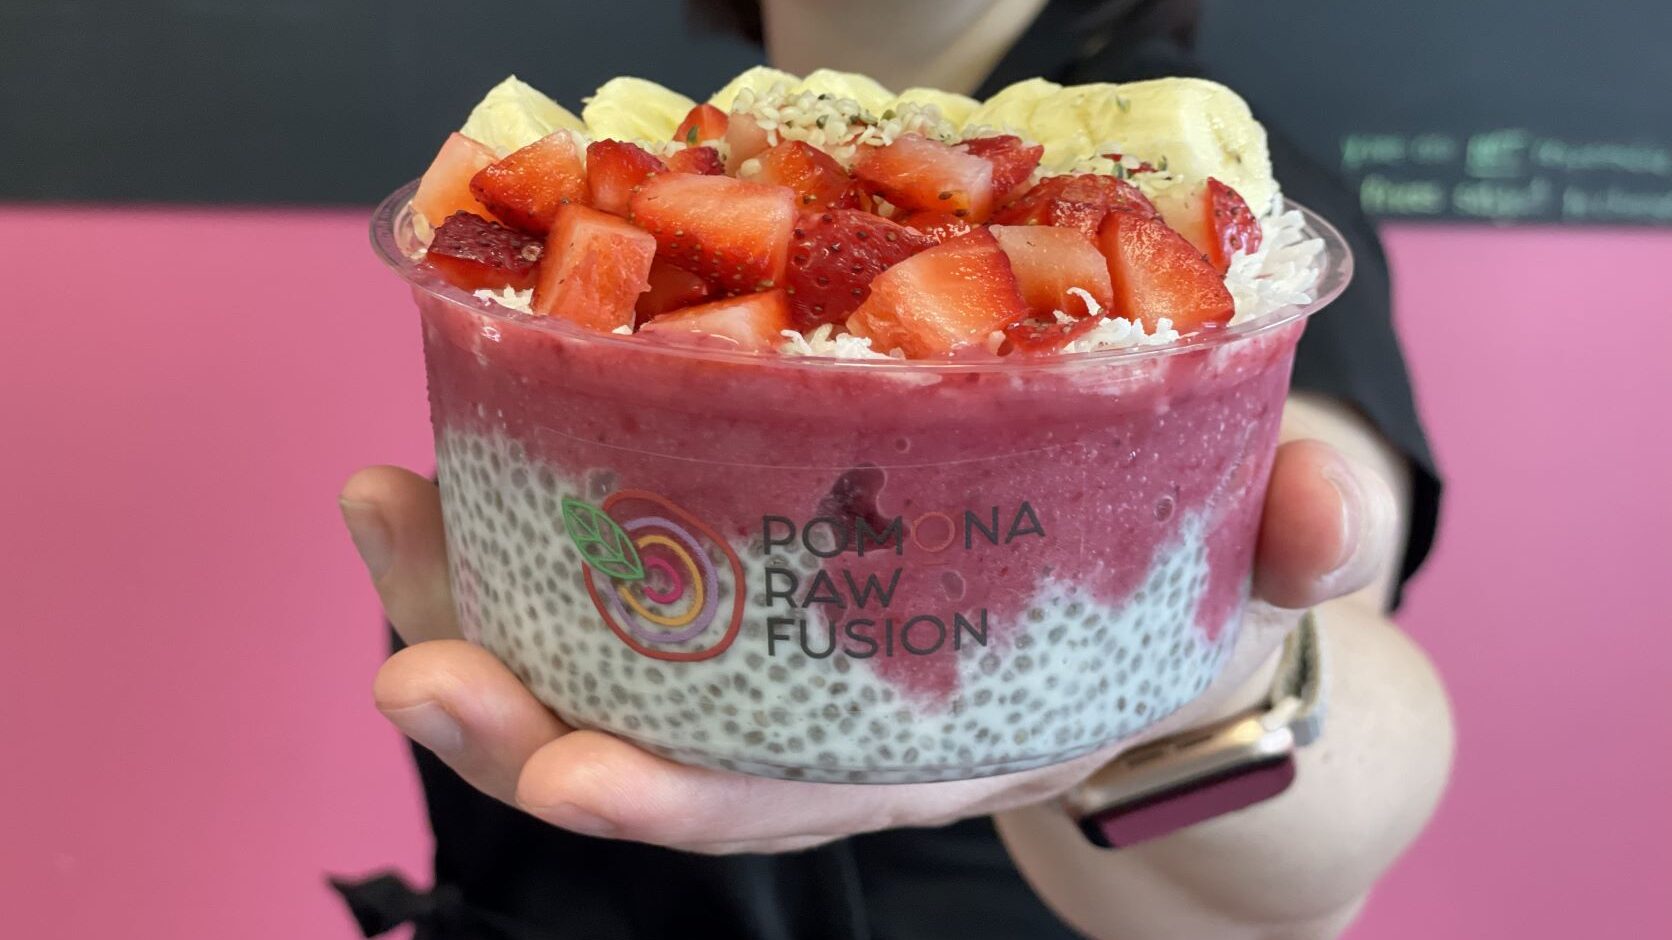 Acai bowl Delivery in Longueuil, Discover Acai bowl Restaurants with  Takeout